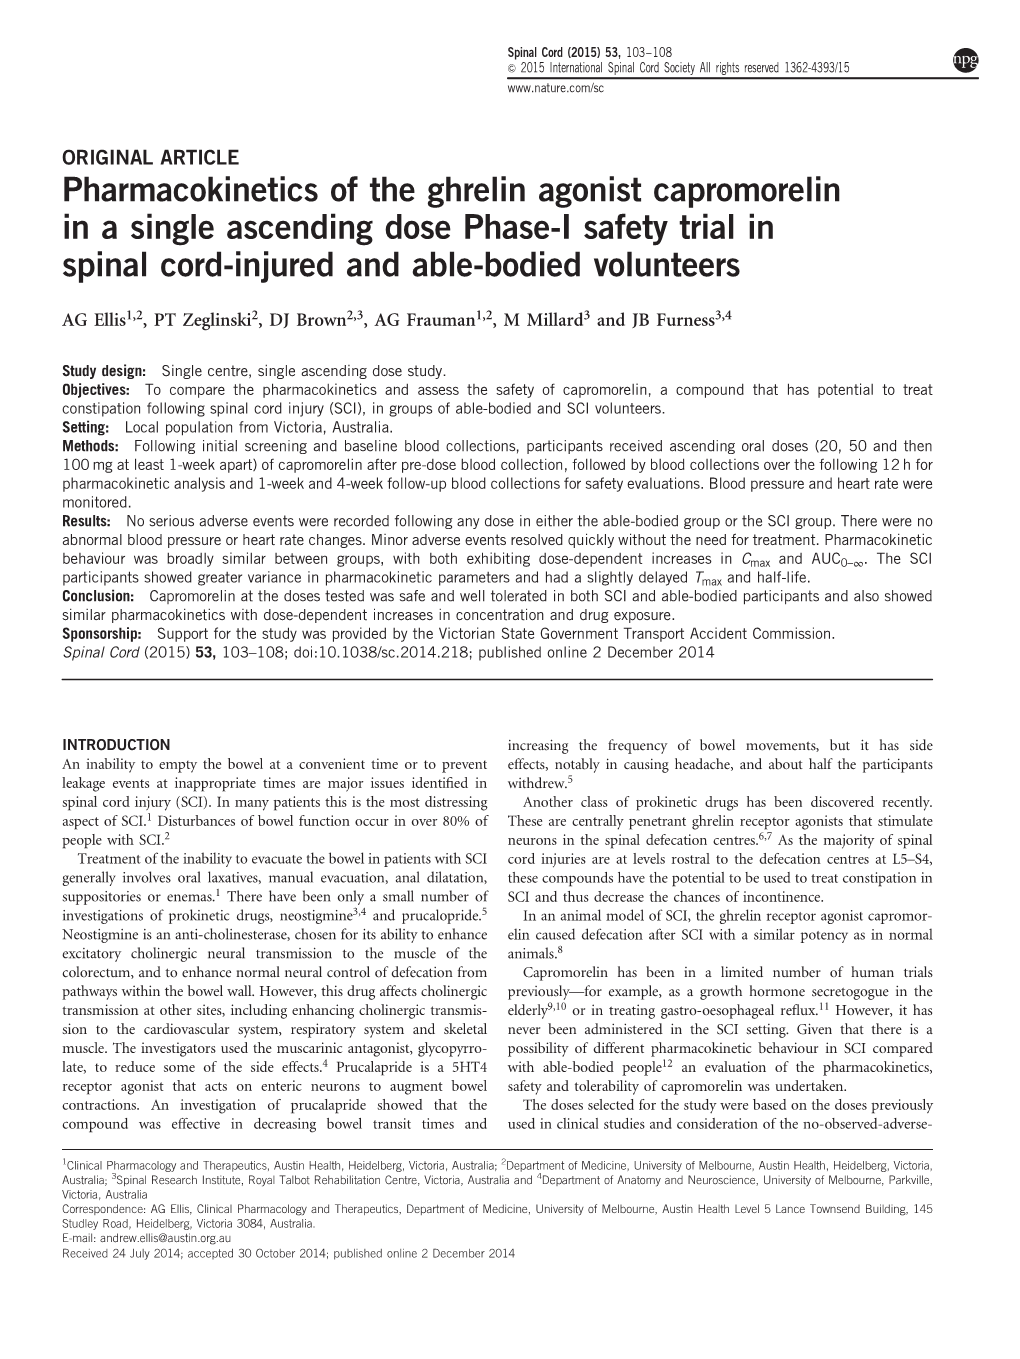 Pharmacokinetics of the Ghrelin Agonist Capromorelin in a Single Ascending Dose Phase-I Safety Trial in Spinal Cord-Injured and Able-Bodied Volunteers